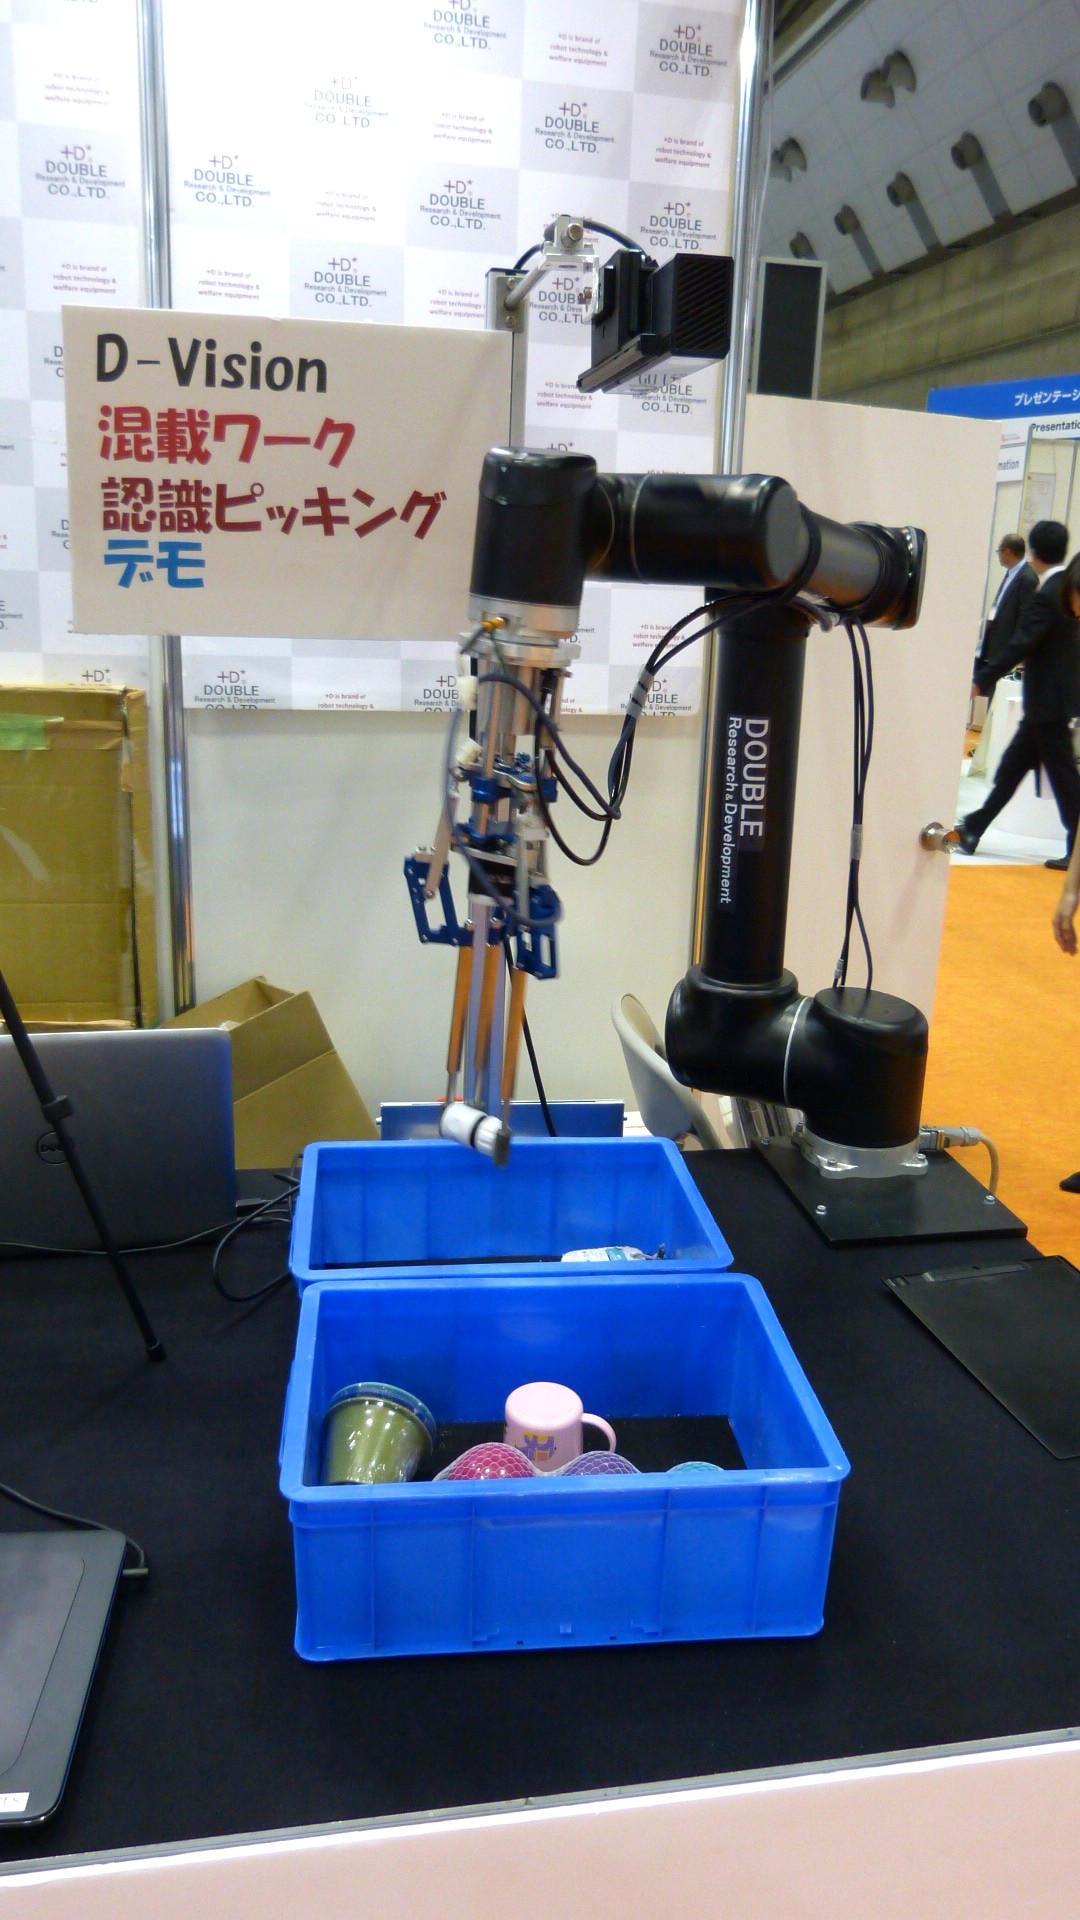 a robot arm sorts coffee mugs from one bin into another near a sign that reads D-Vision